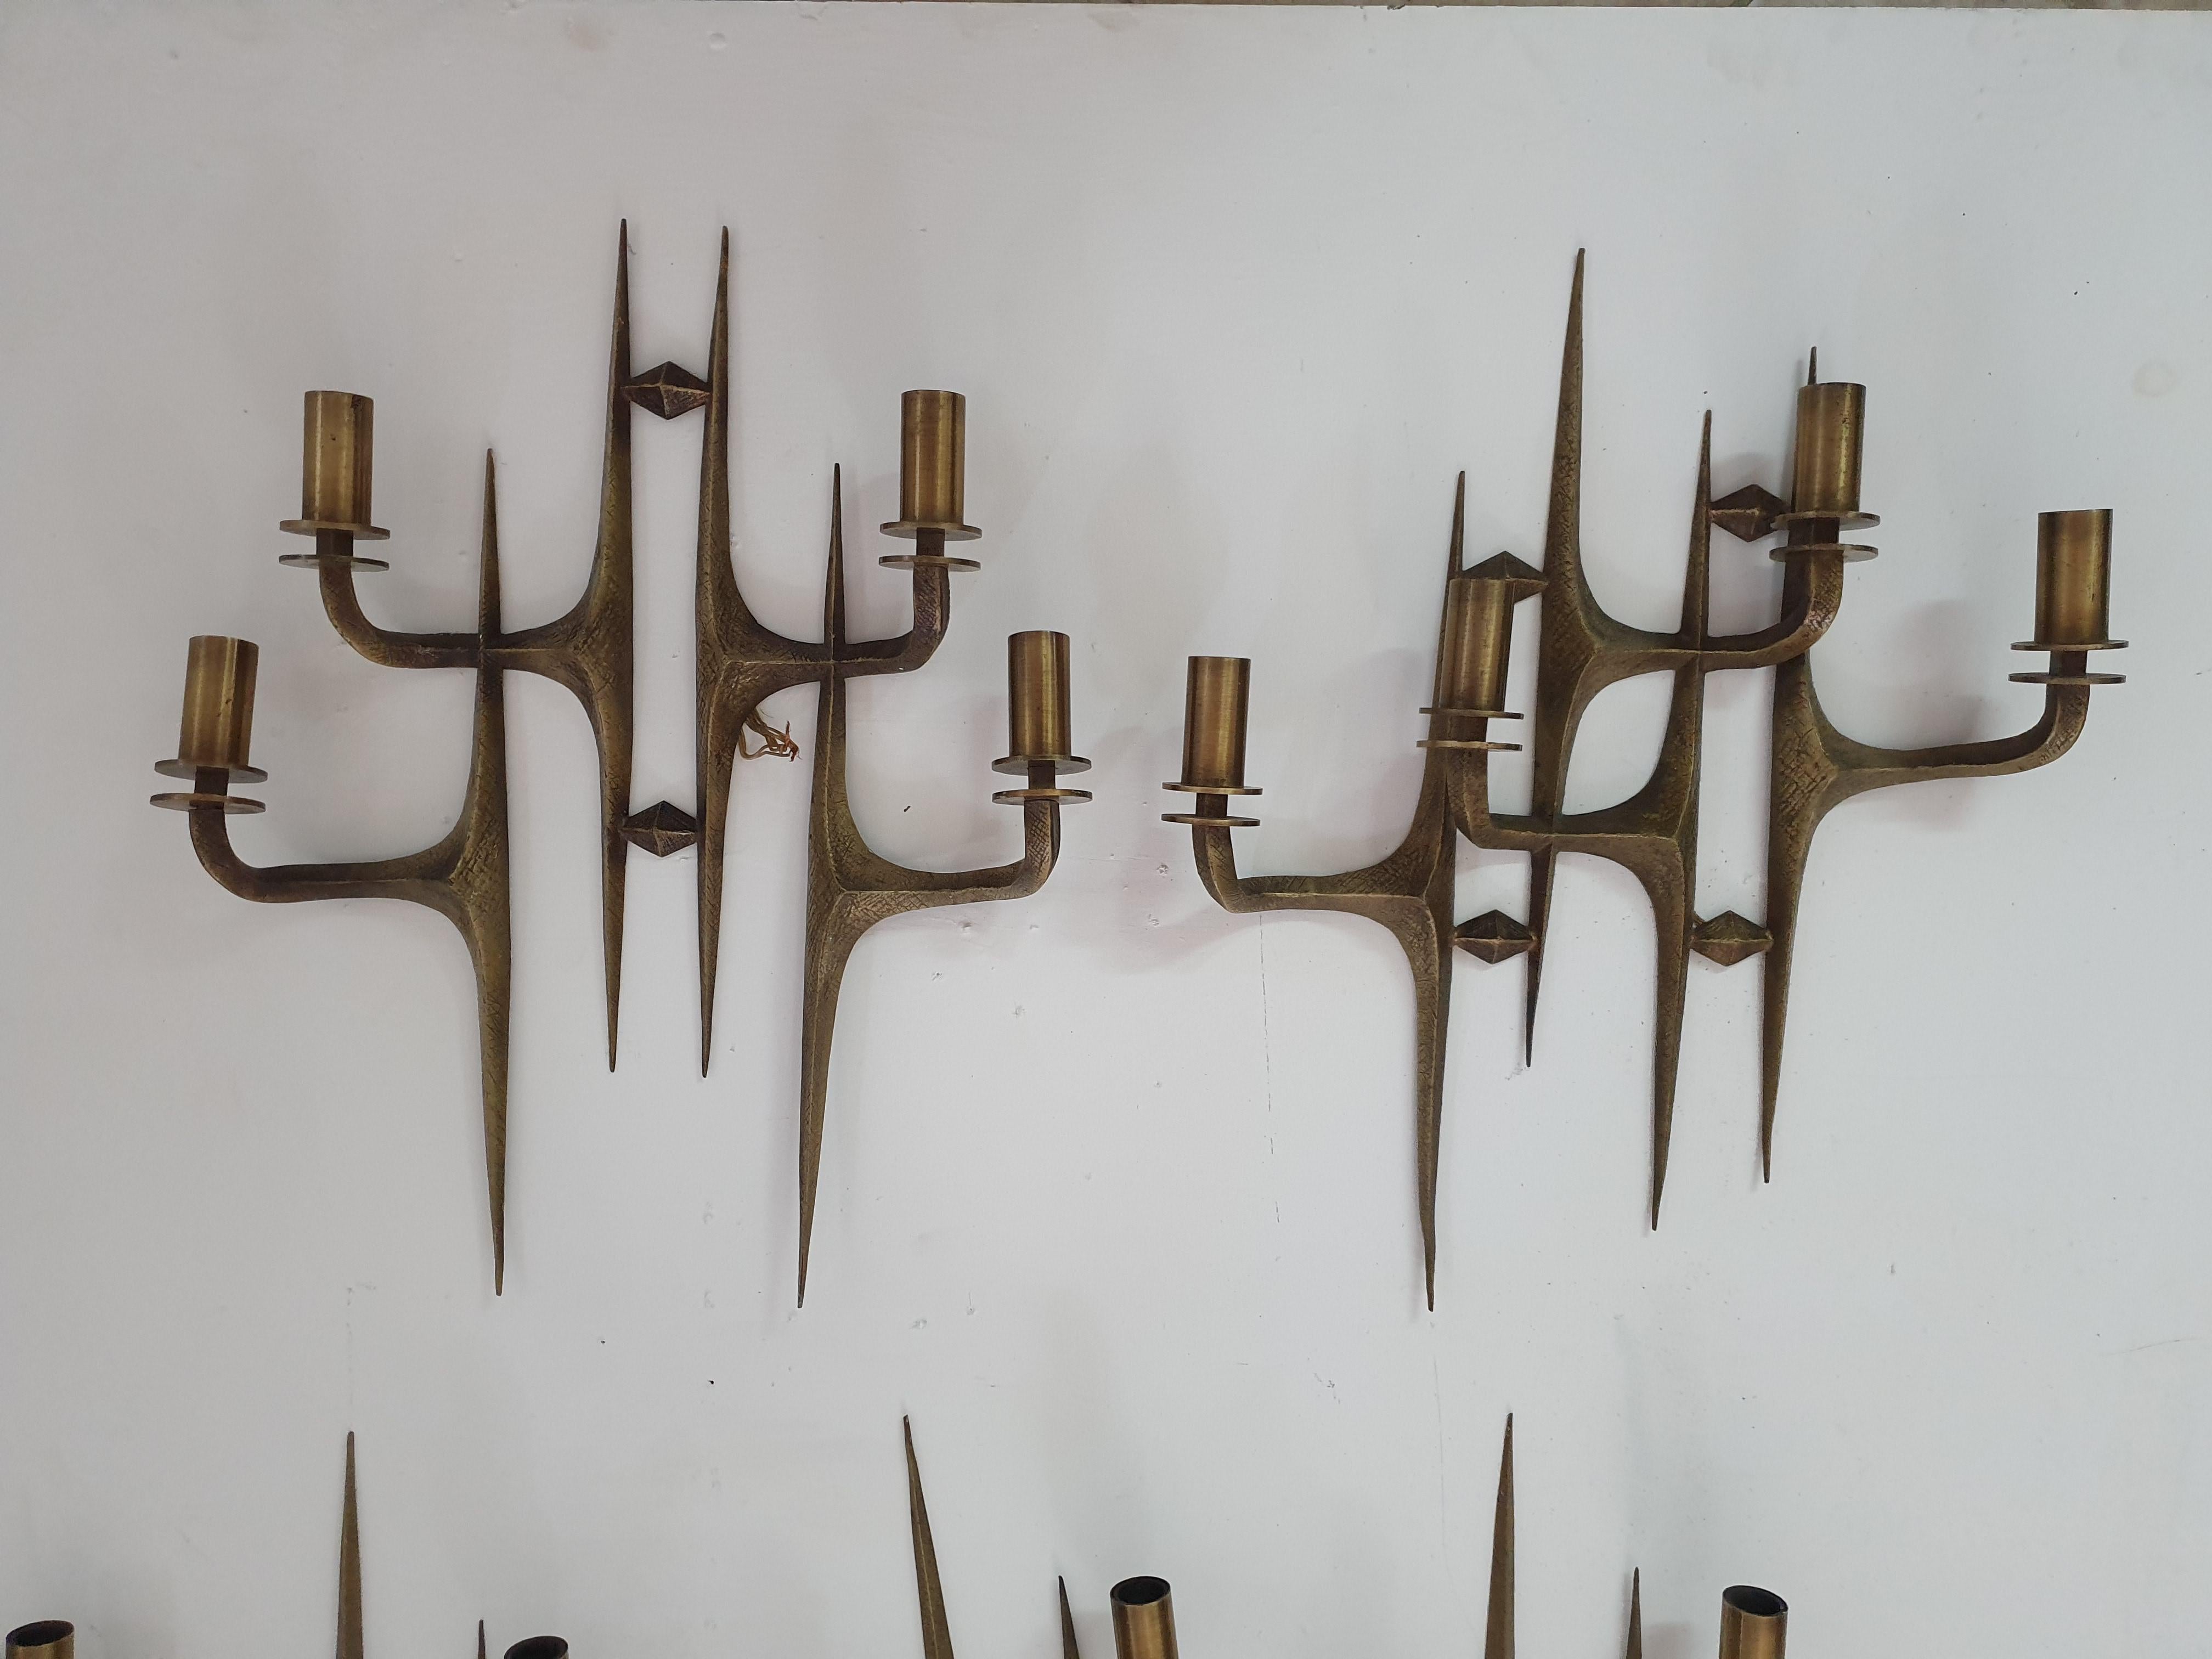 Pair of Four Light Mid-Century Modern Brutalist Sconces, Italy, circa 1960s For Sale 4